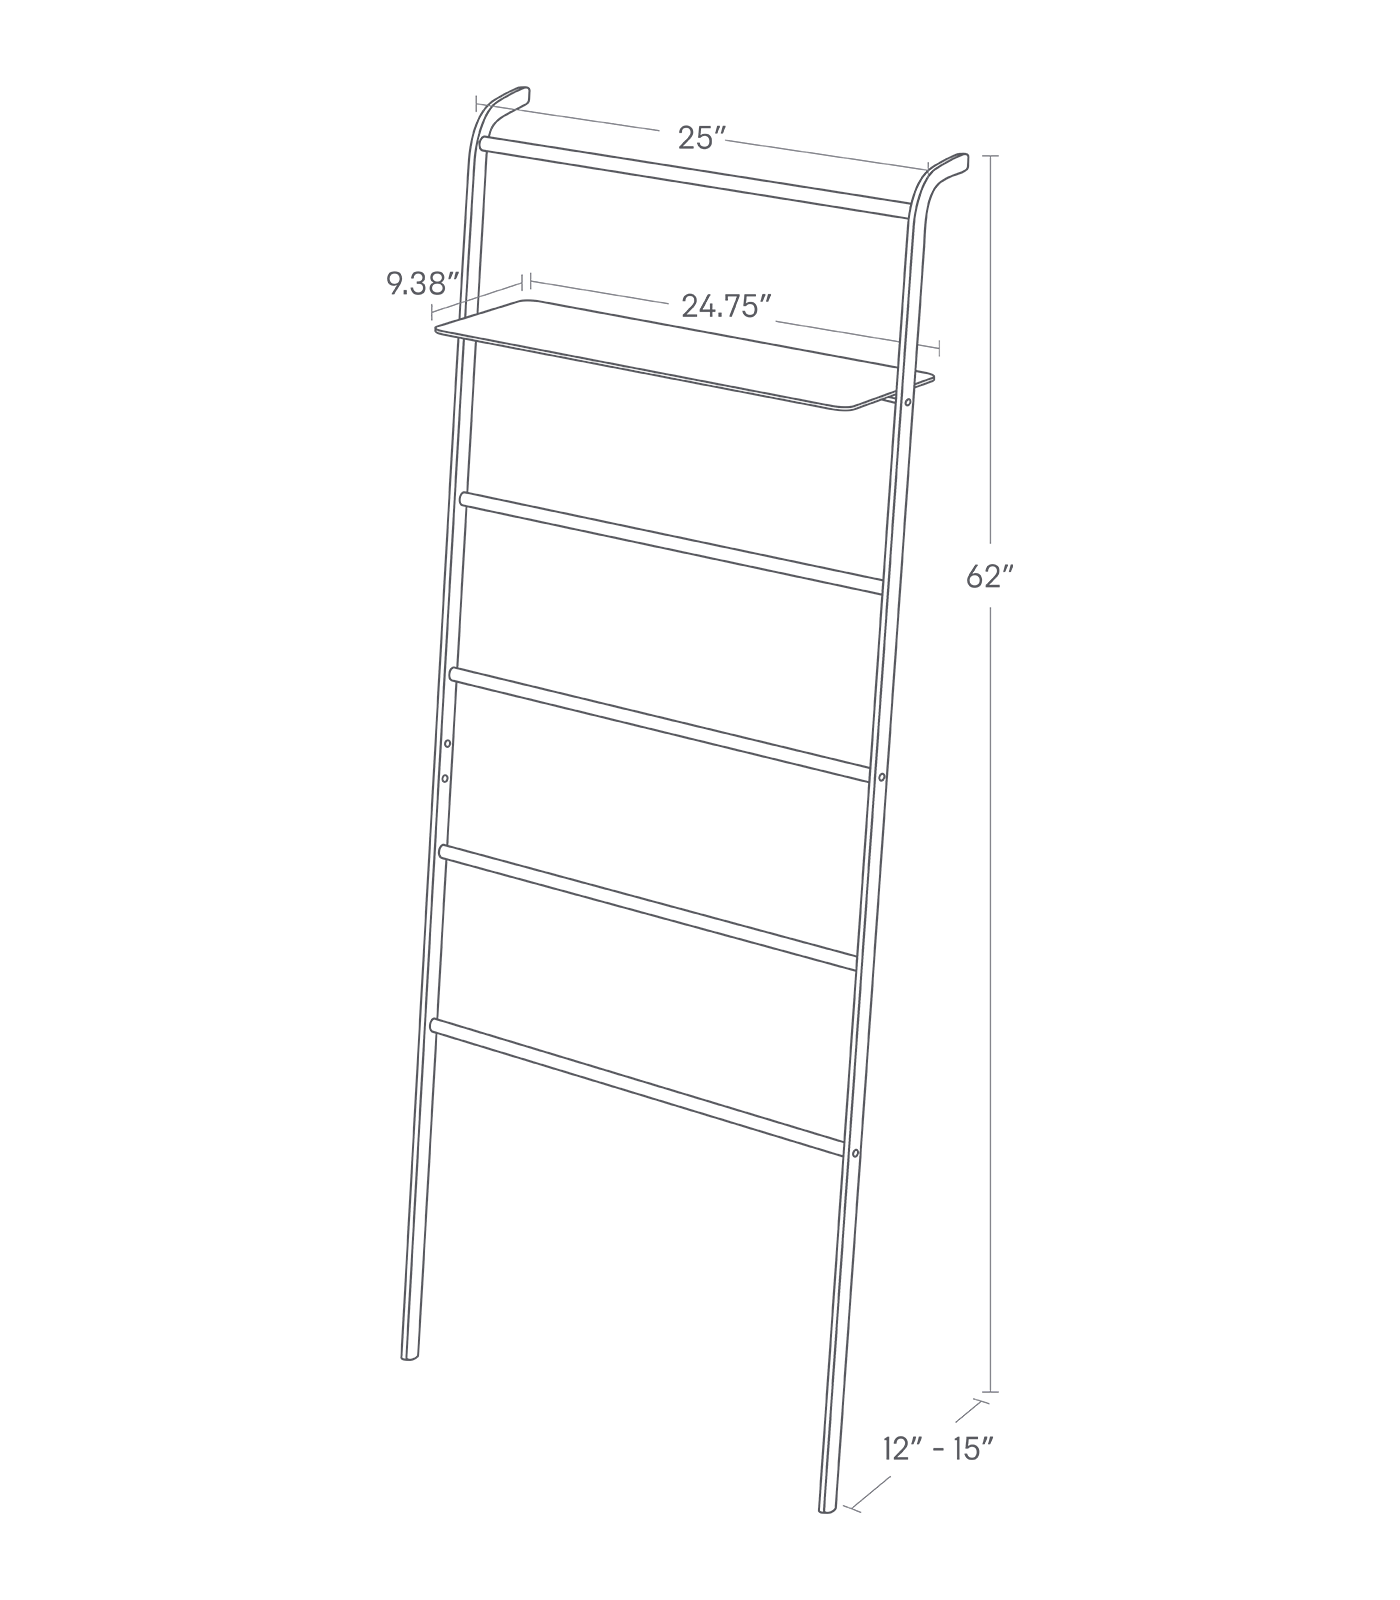 Dimension image for Leaning Storage Ladder - Two Styles on a white background including dimensions  L 9.84 x W 25.98 x H 62.99 inches